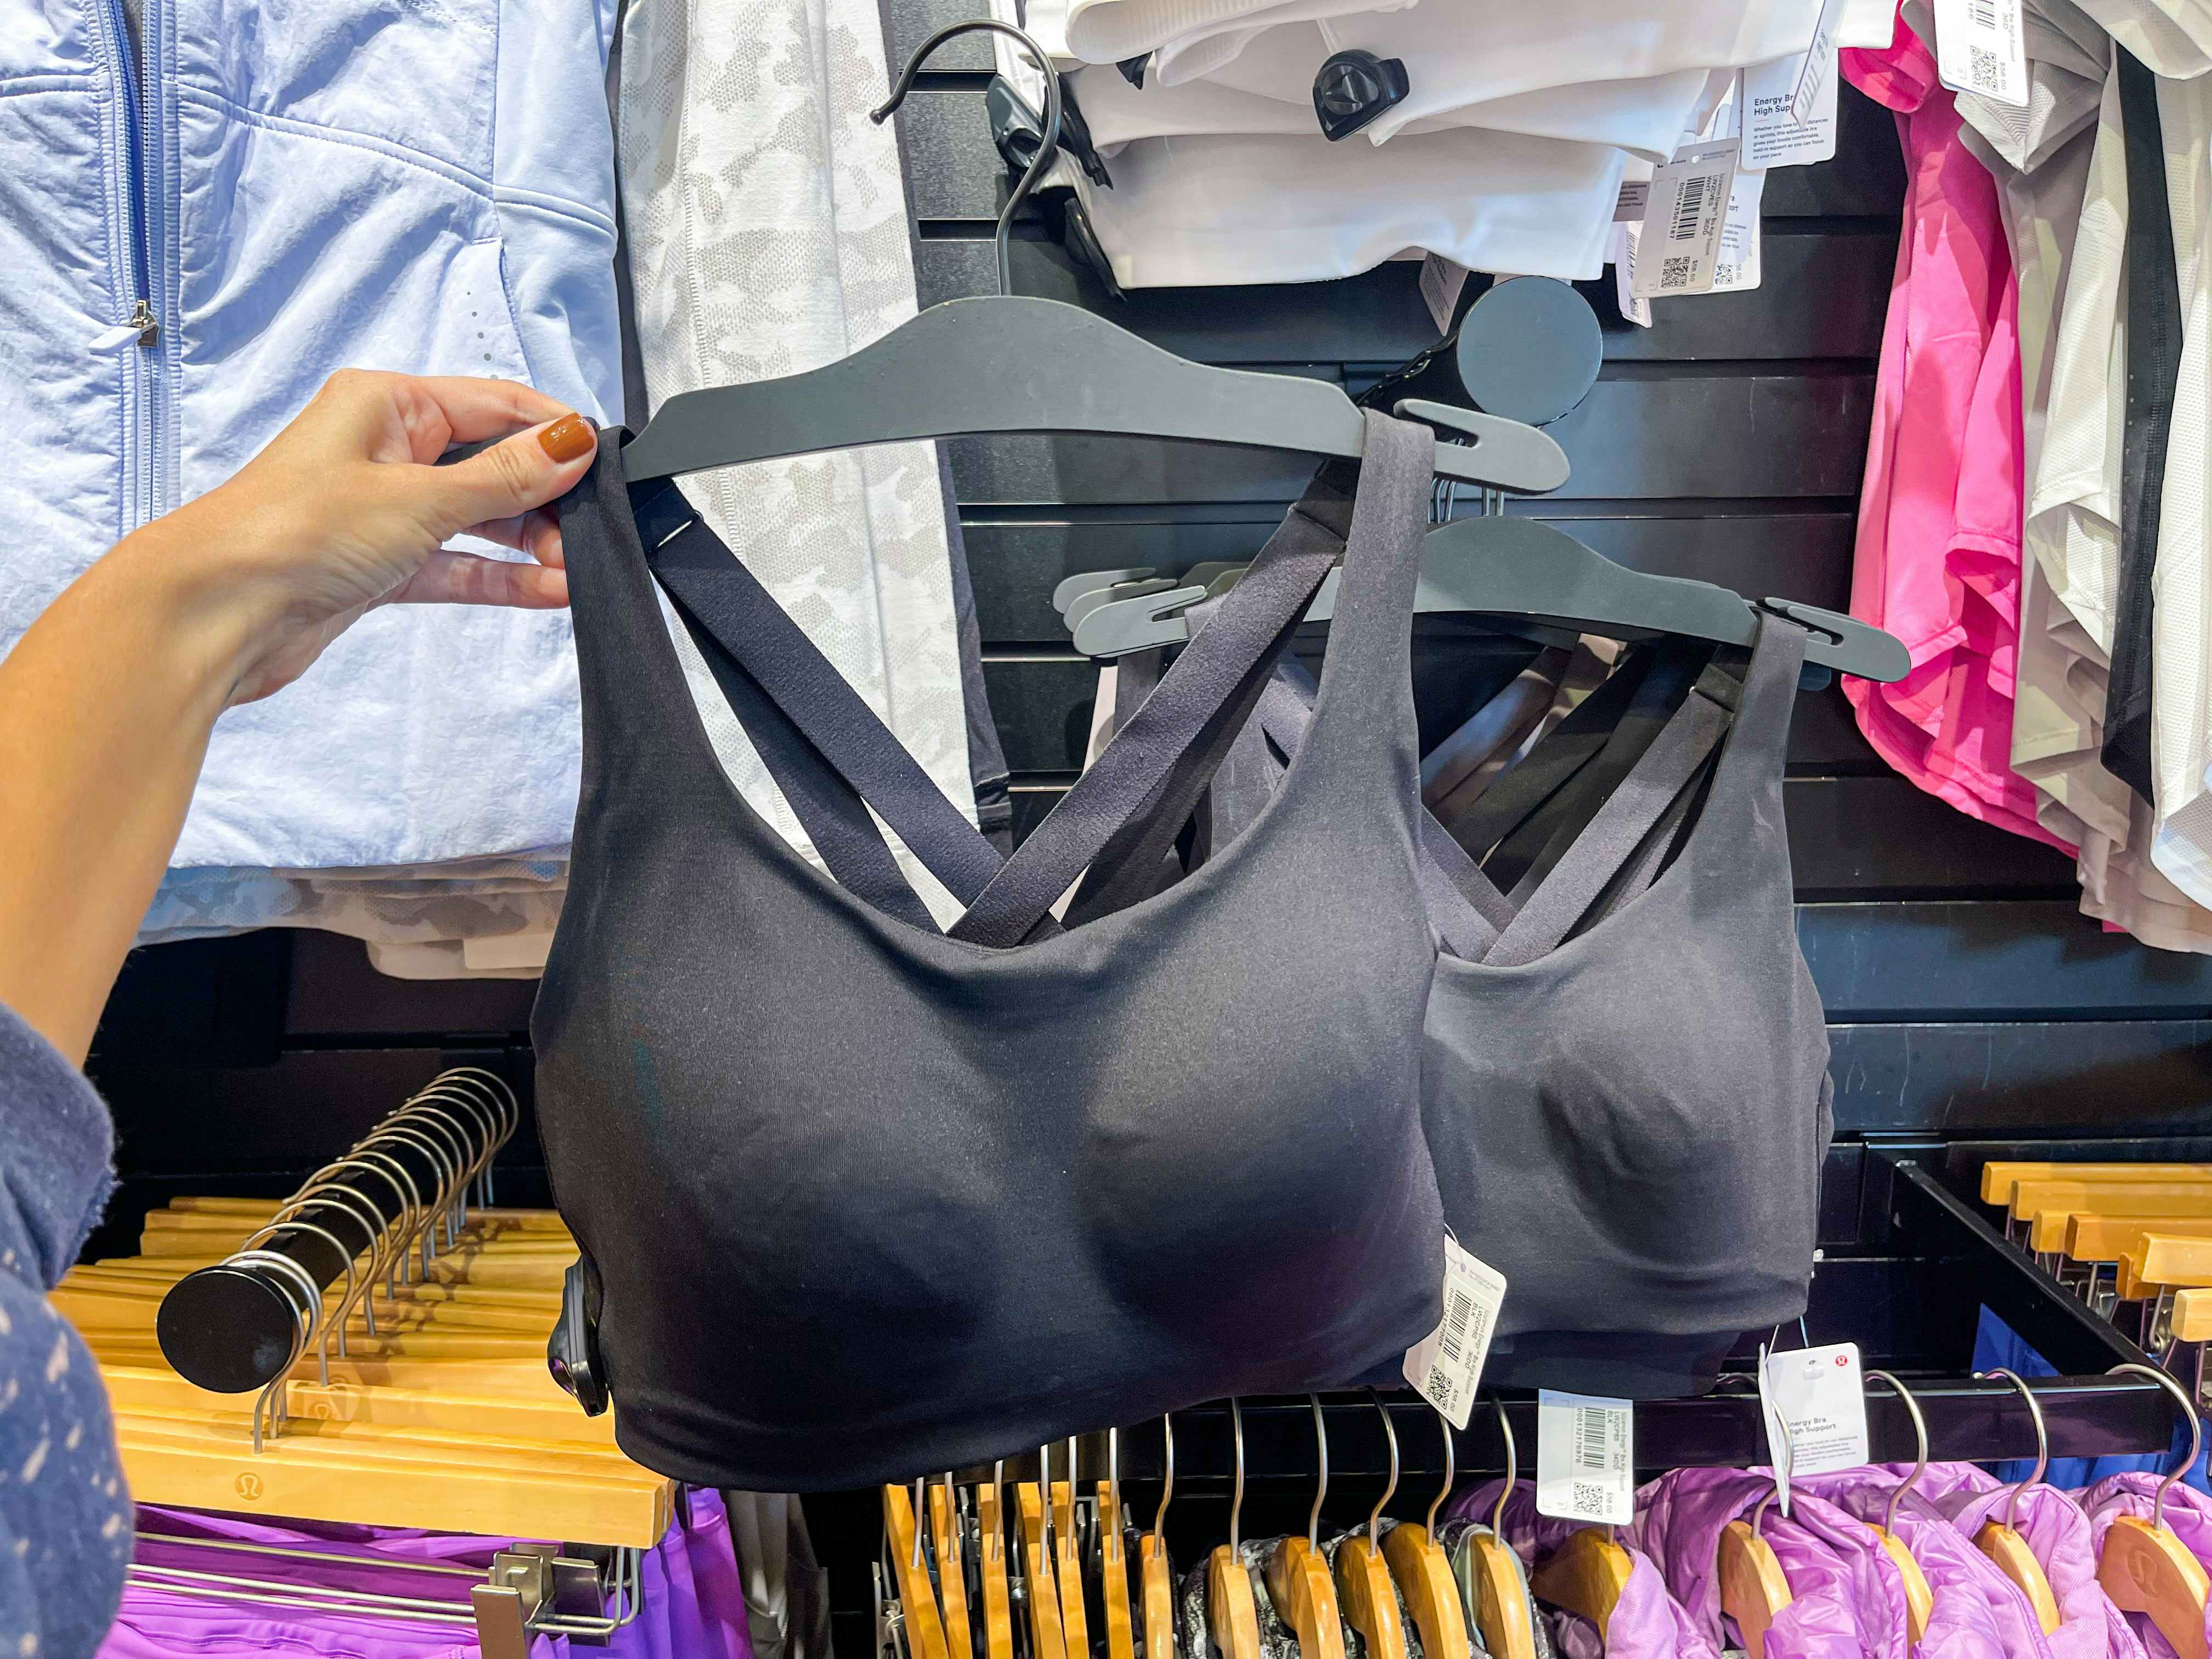 A black sports bra held out by hand in front of other sports bras.